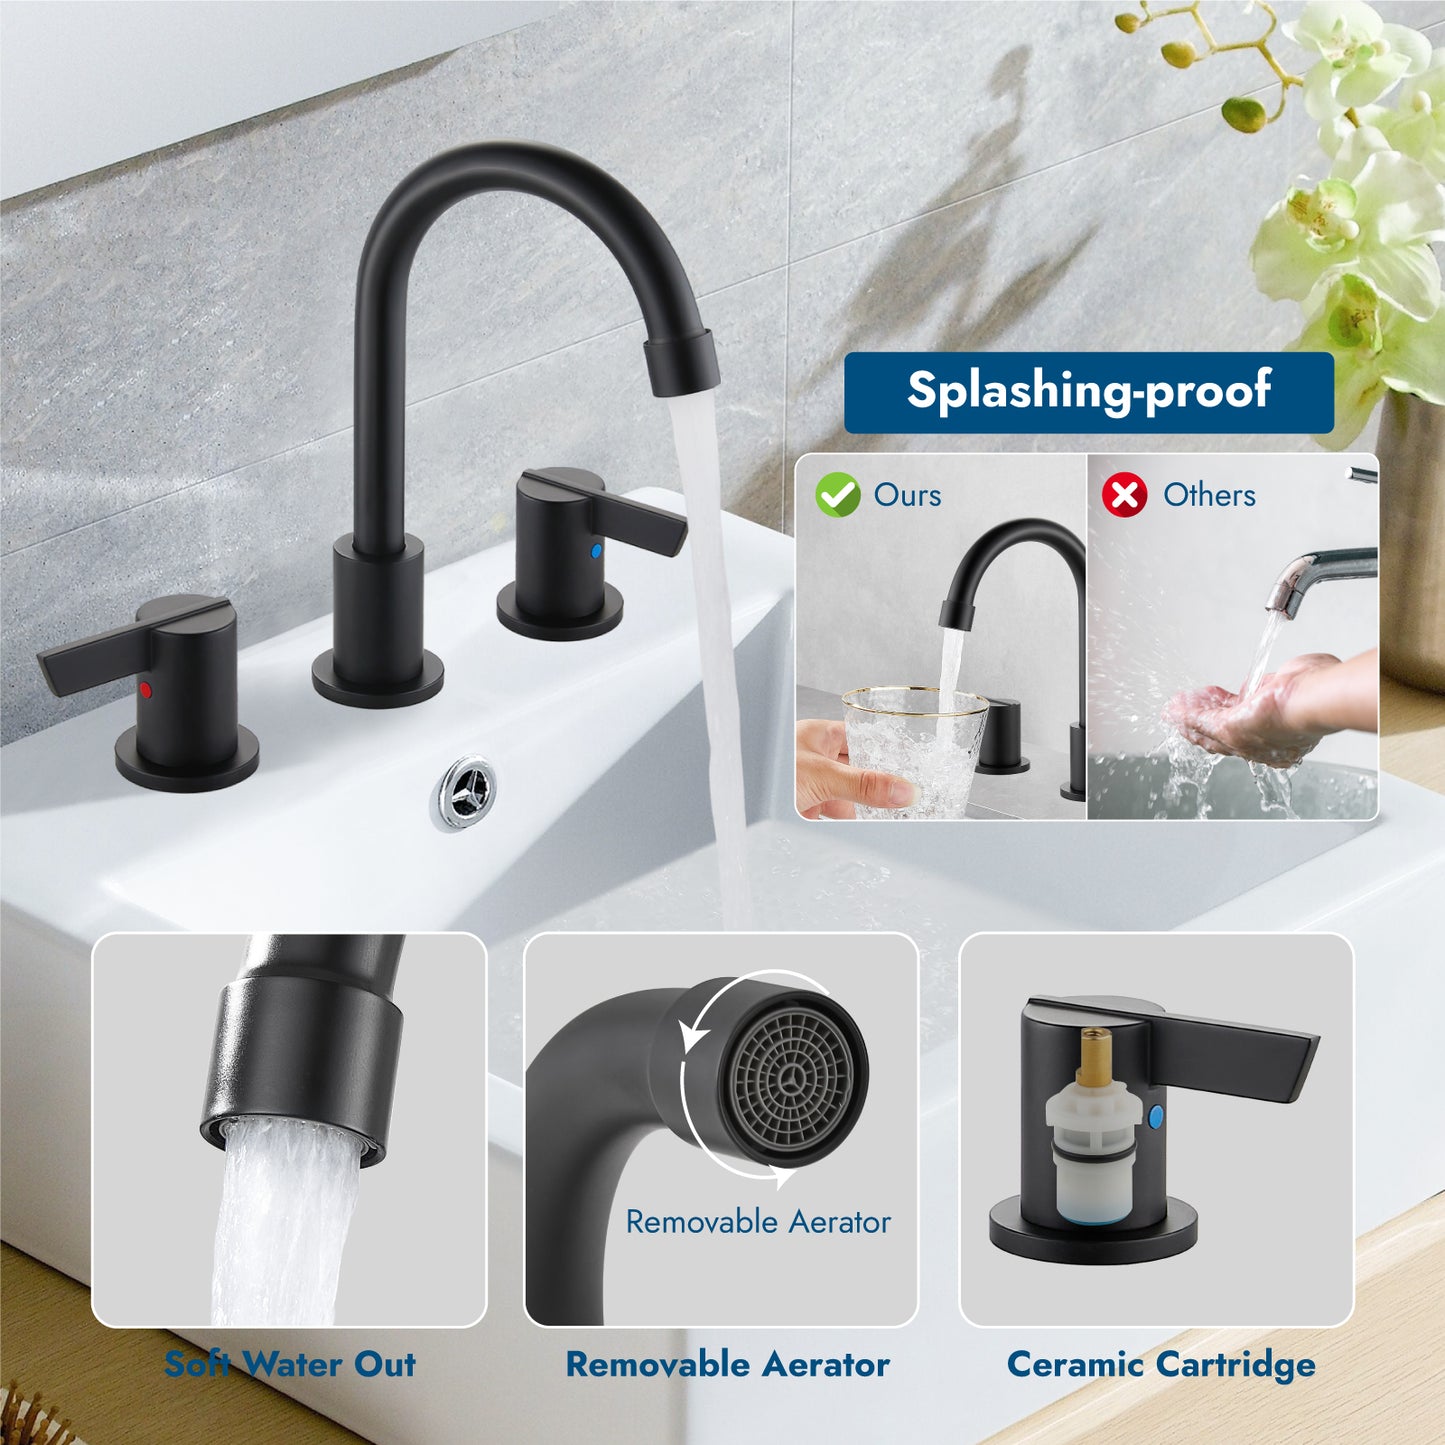 
                  
                    Cinwiny Bathroom Faucets for Sink 3 Hole 8 Inch Widespread Bathroom Faucet Lavatory Vanity Faucet Deck Mounted 2 Handle Bathroom Sink Faucet with Pop-up Drain + One Hair Catcher Include
                  
                